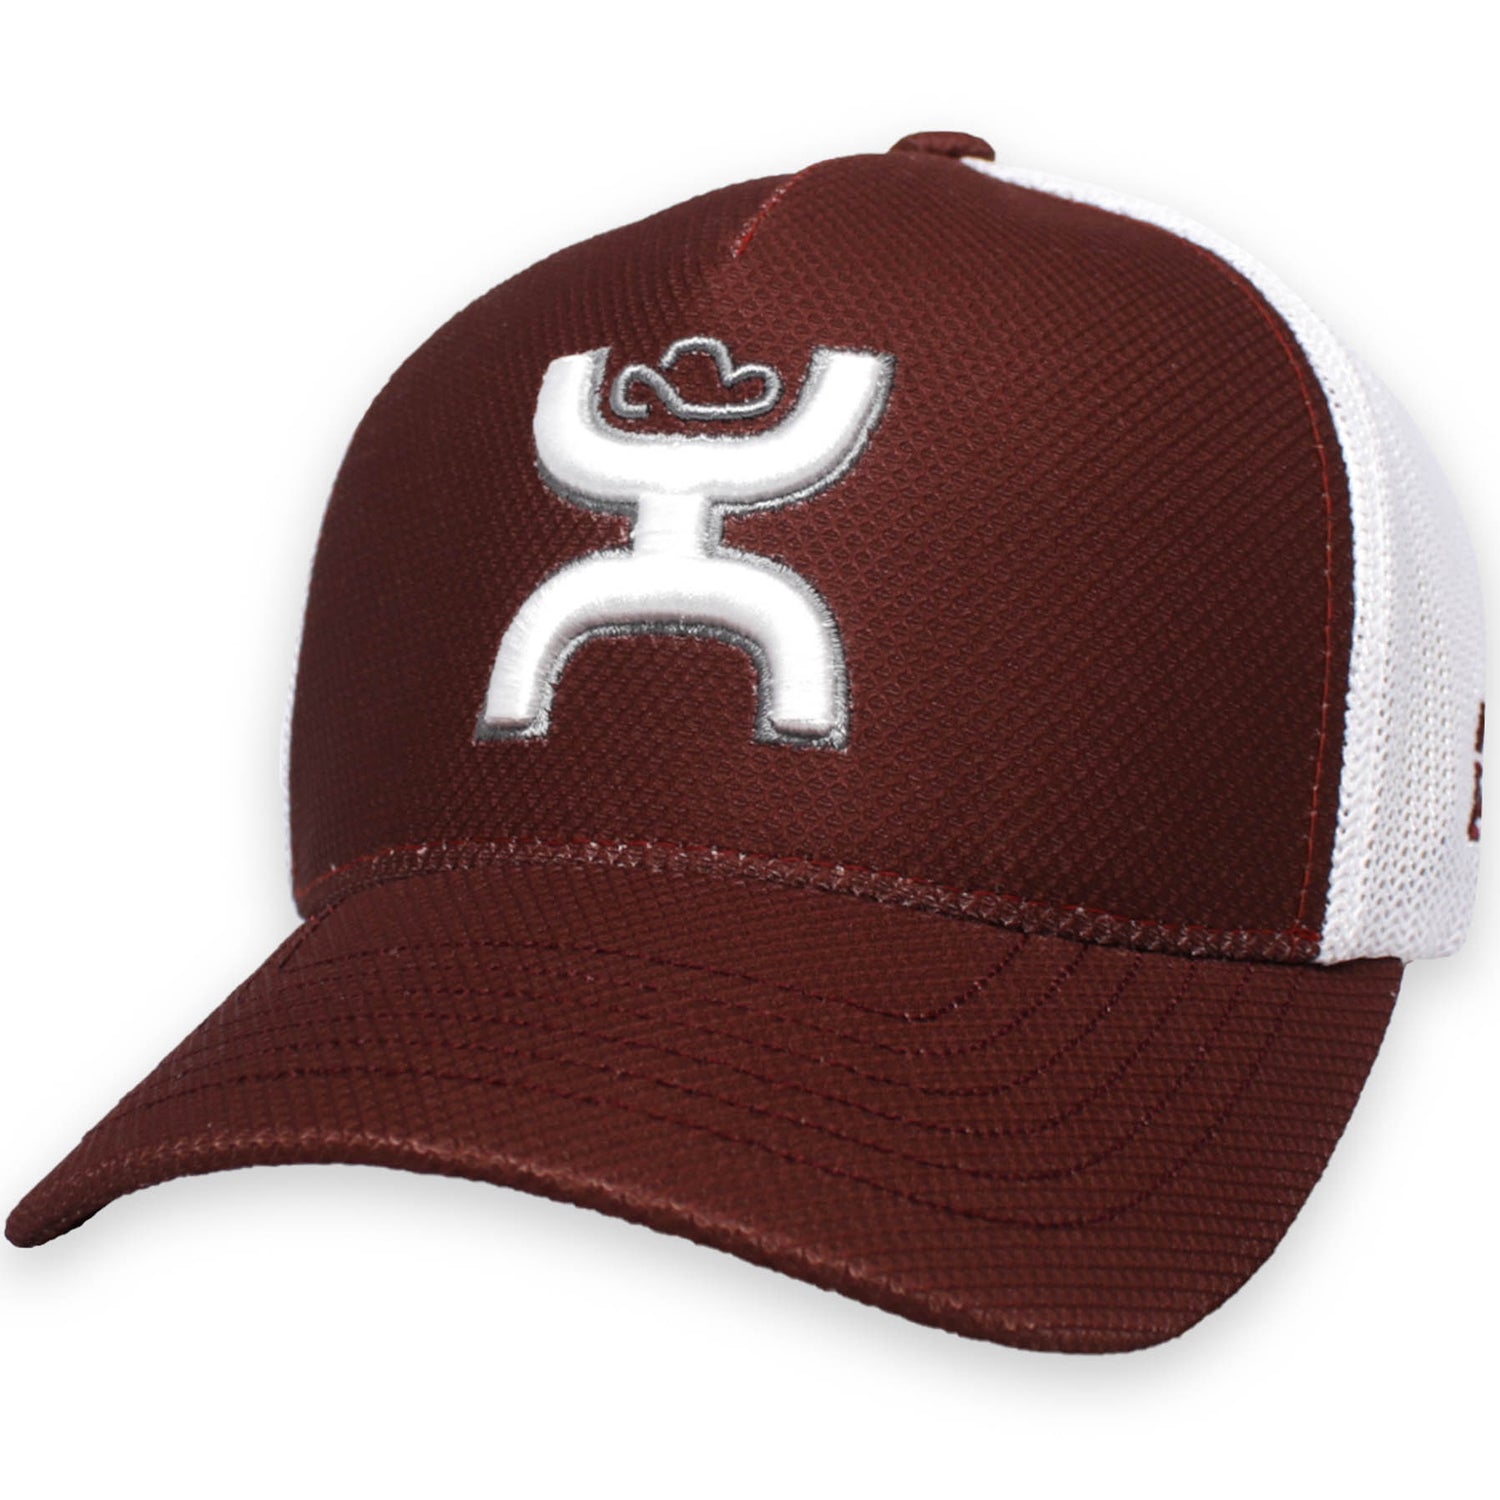 Texas A&M Hooey Maroon & White Fitted Cap